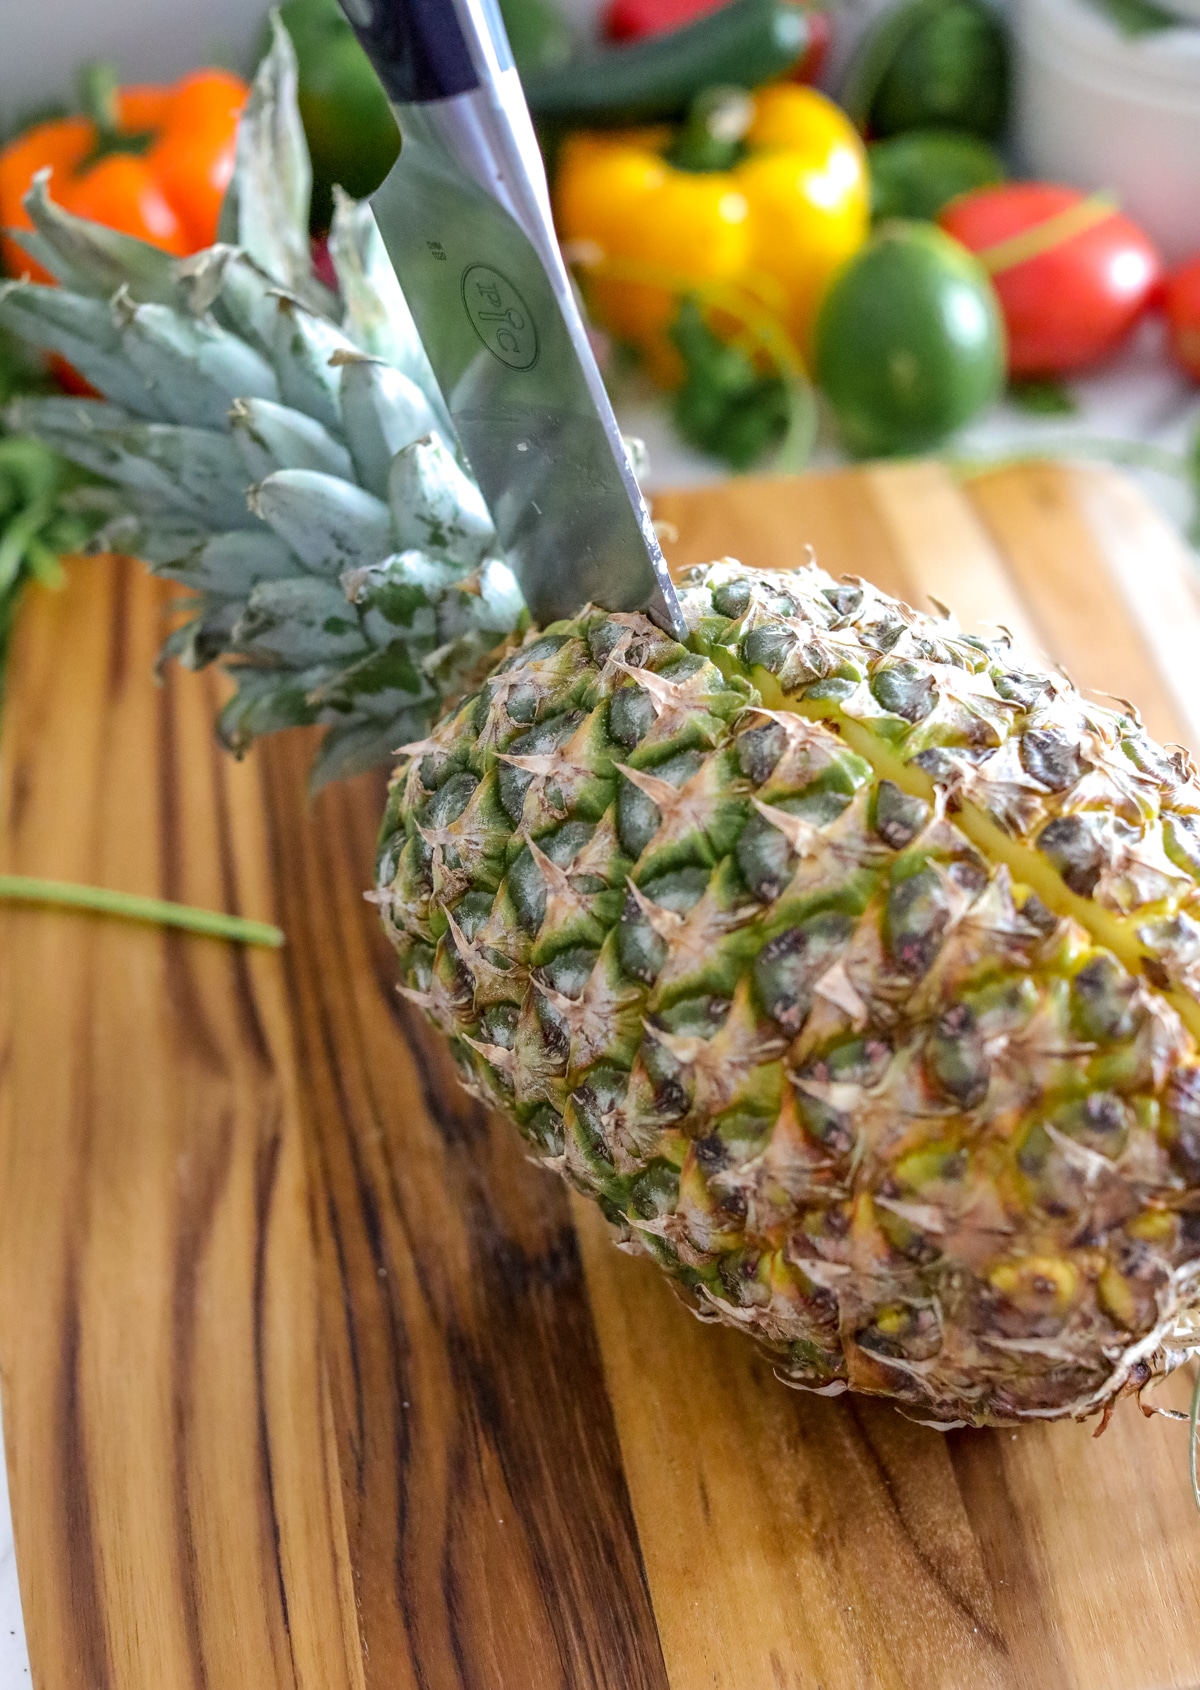 Slice Pineapple lengthwise with a knife